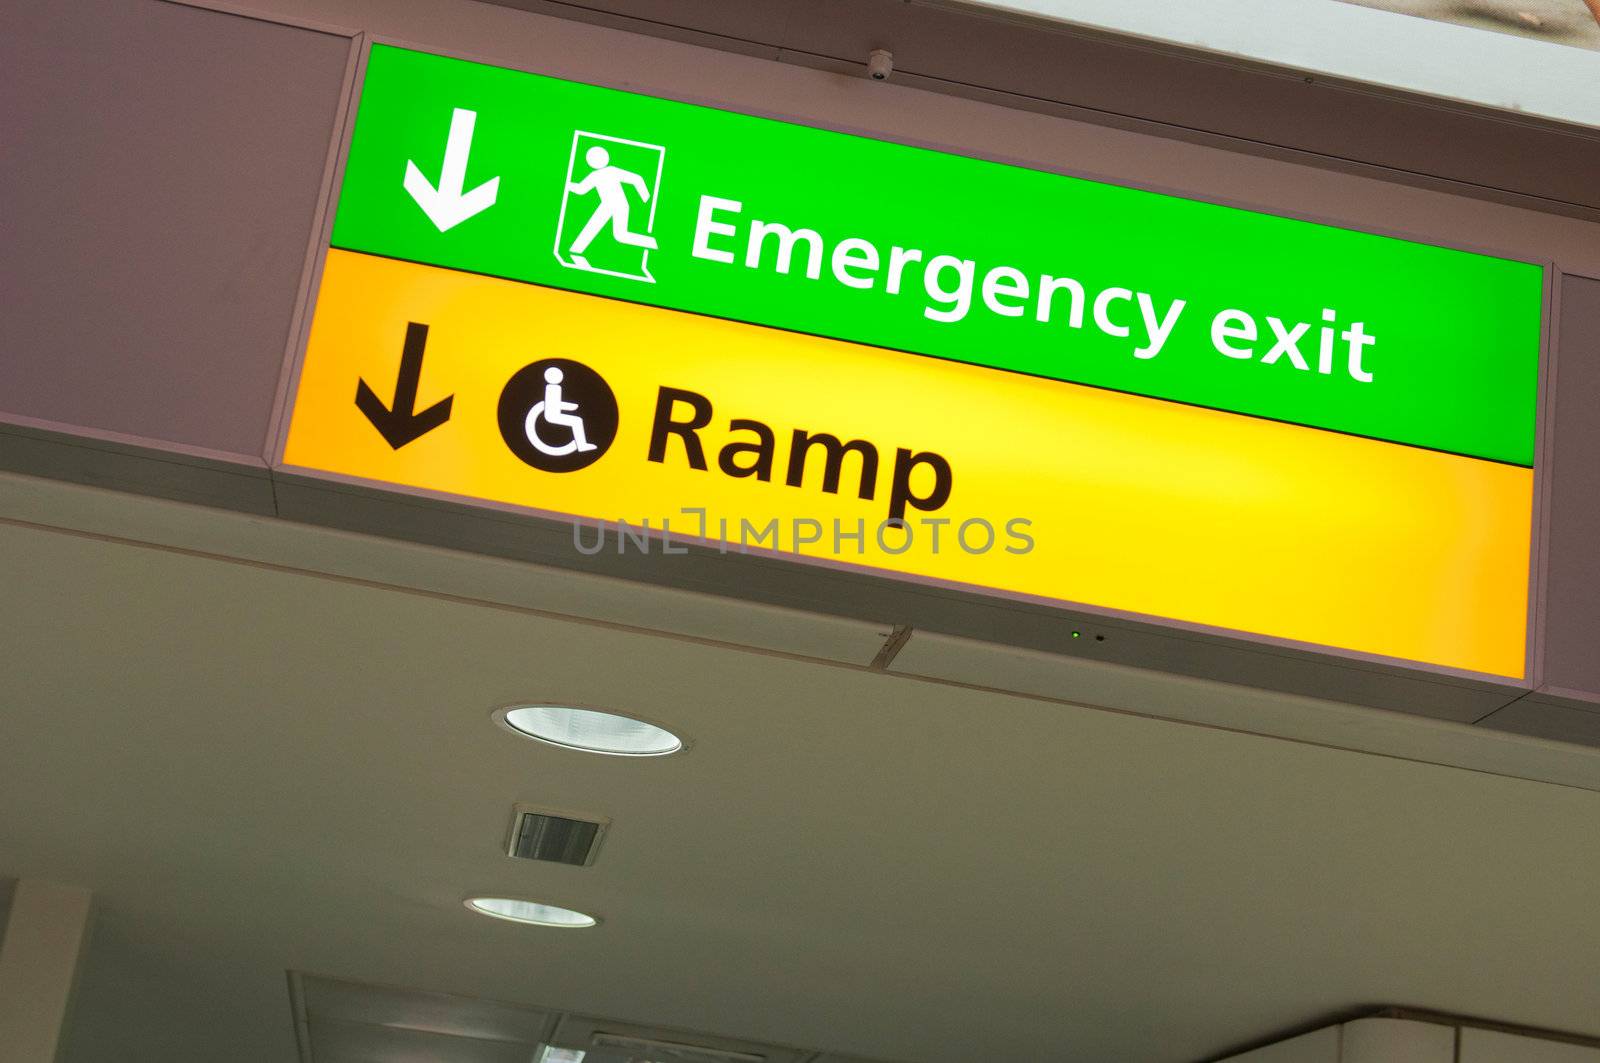 Emergency exit and ramp access sign by luissantos84